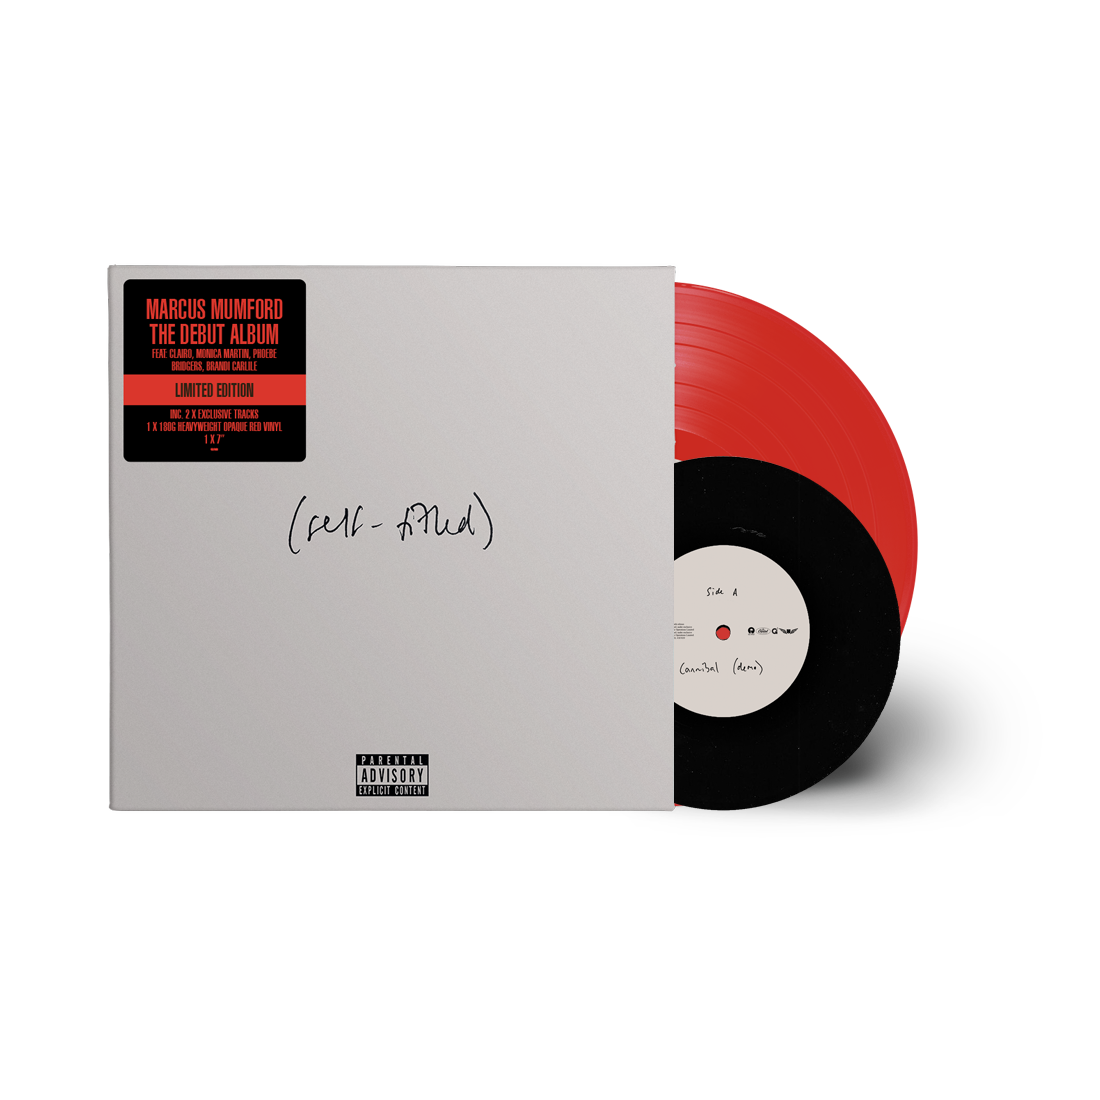 Marcus Mumford - (self-titled) Exclusive 12" Red Vinyl with 7" Black Vinyl